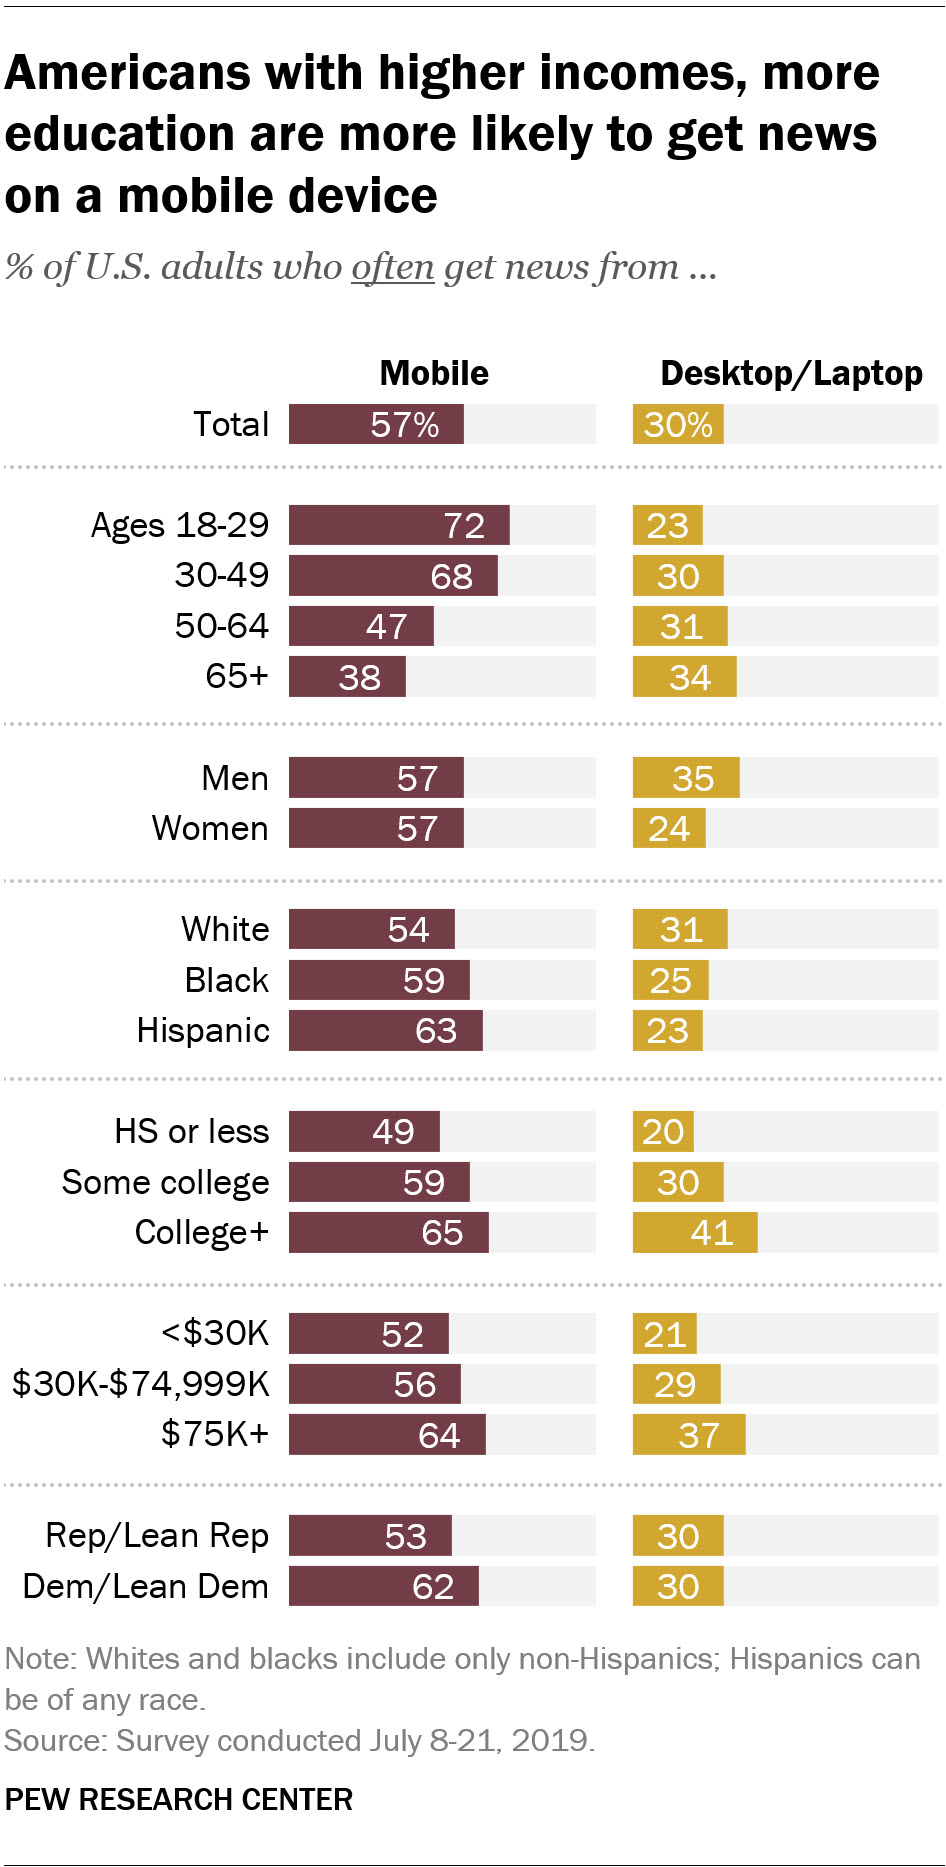 Americans with higher incomes, more education are more likely to get news on a mobile device